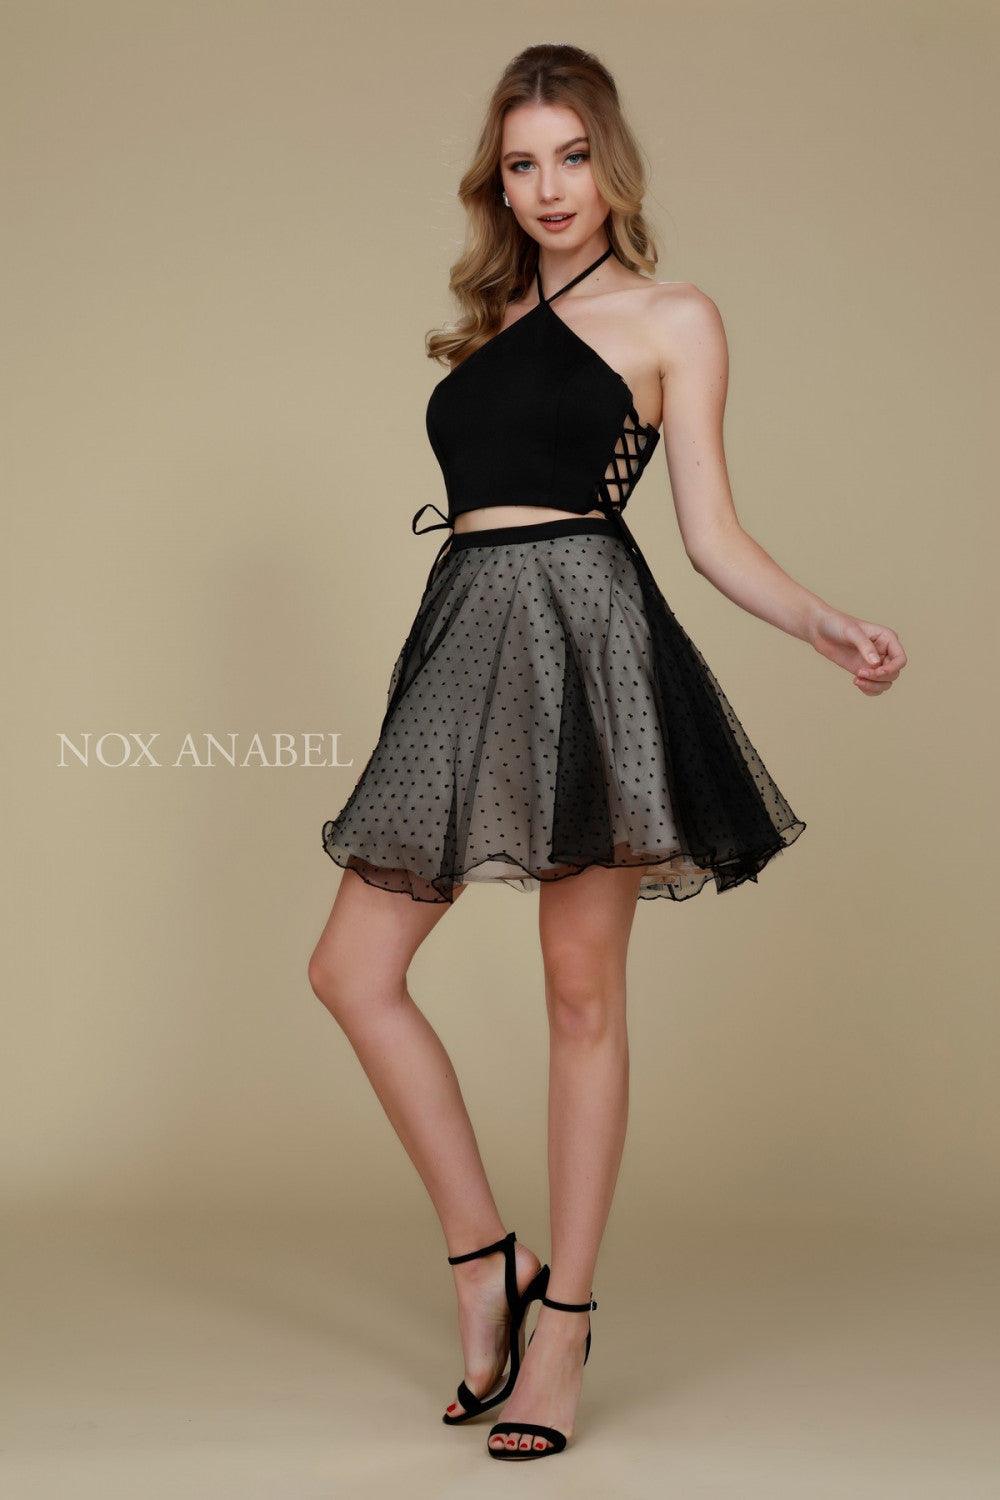 High-Neck Sexy Two Piece Crop Top Prom Dress Black/Nude - The Dress Outlet Nox Anabel